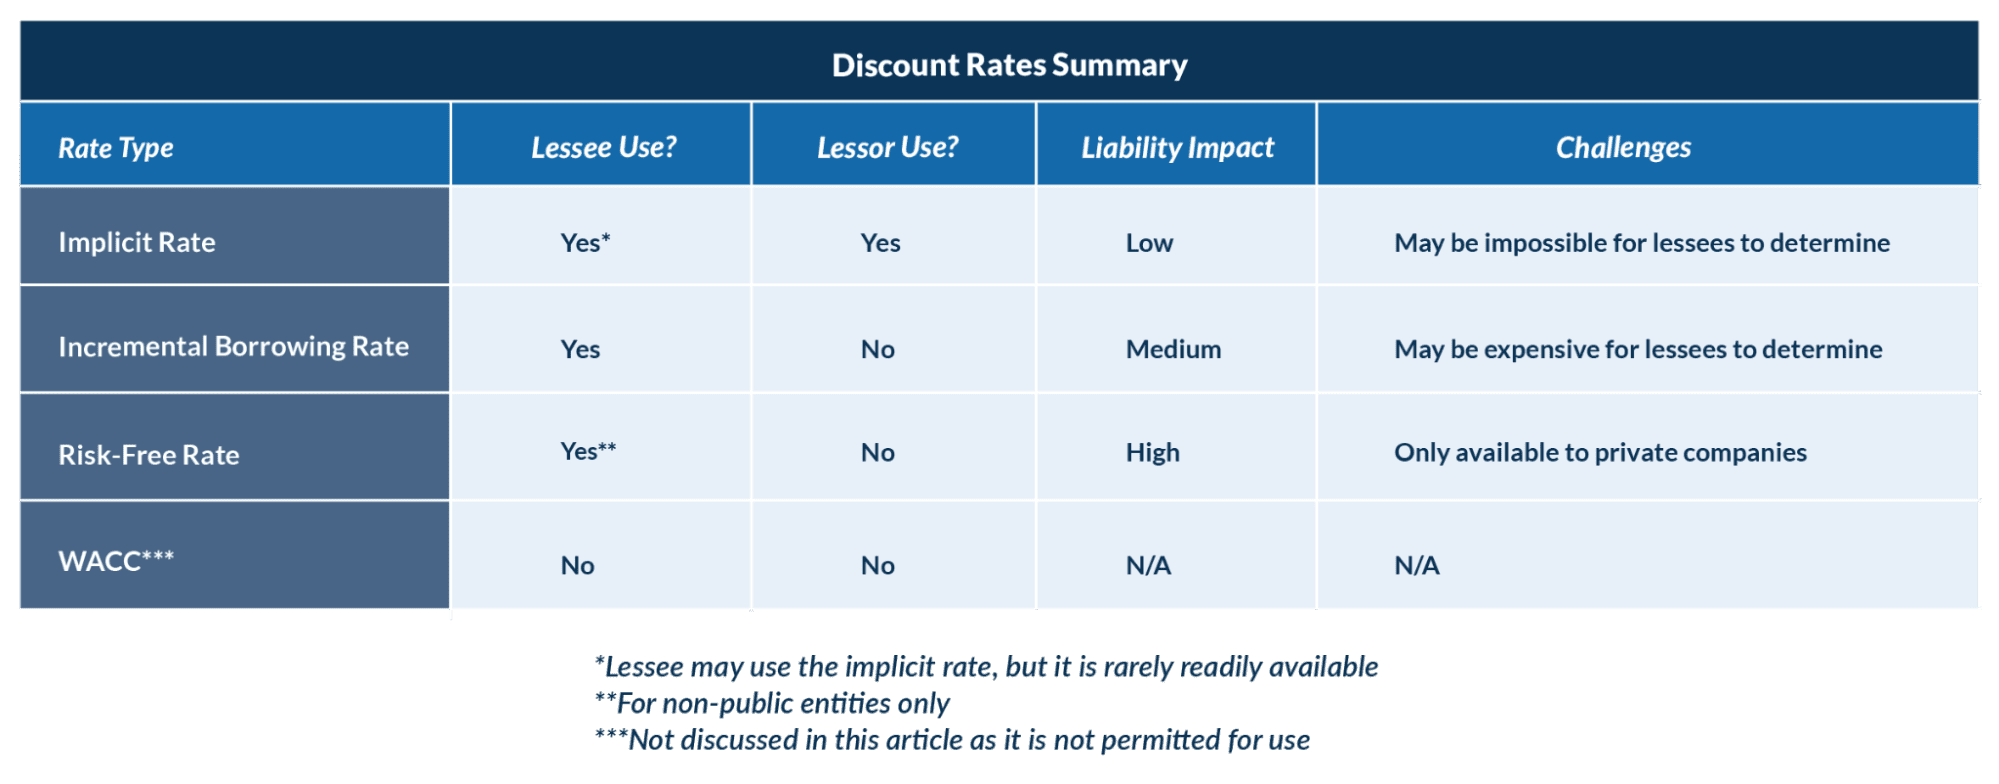 Summary of Discount Rates